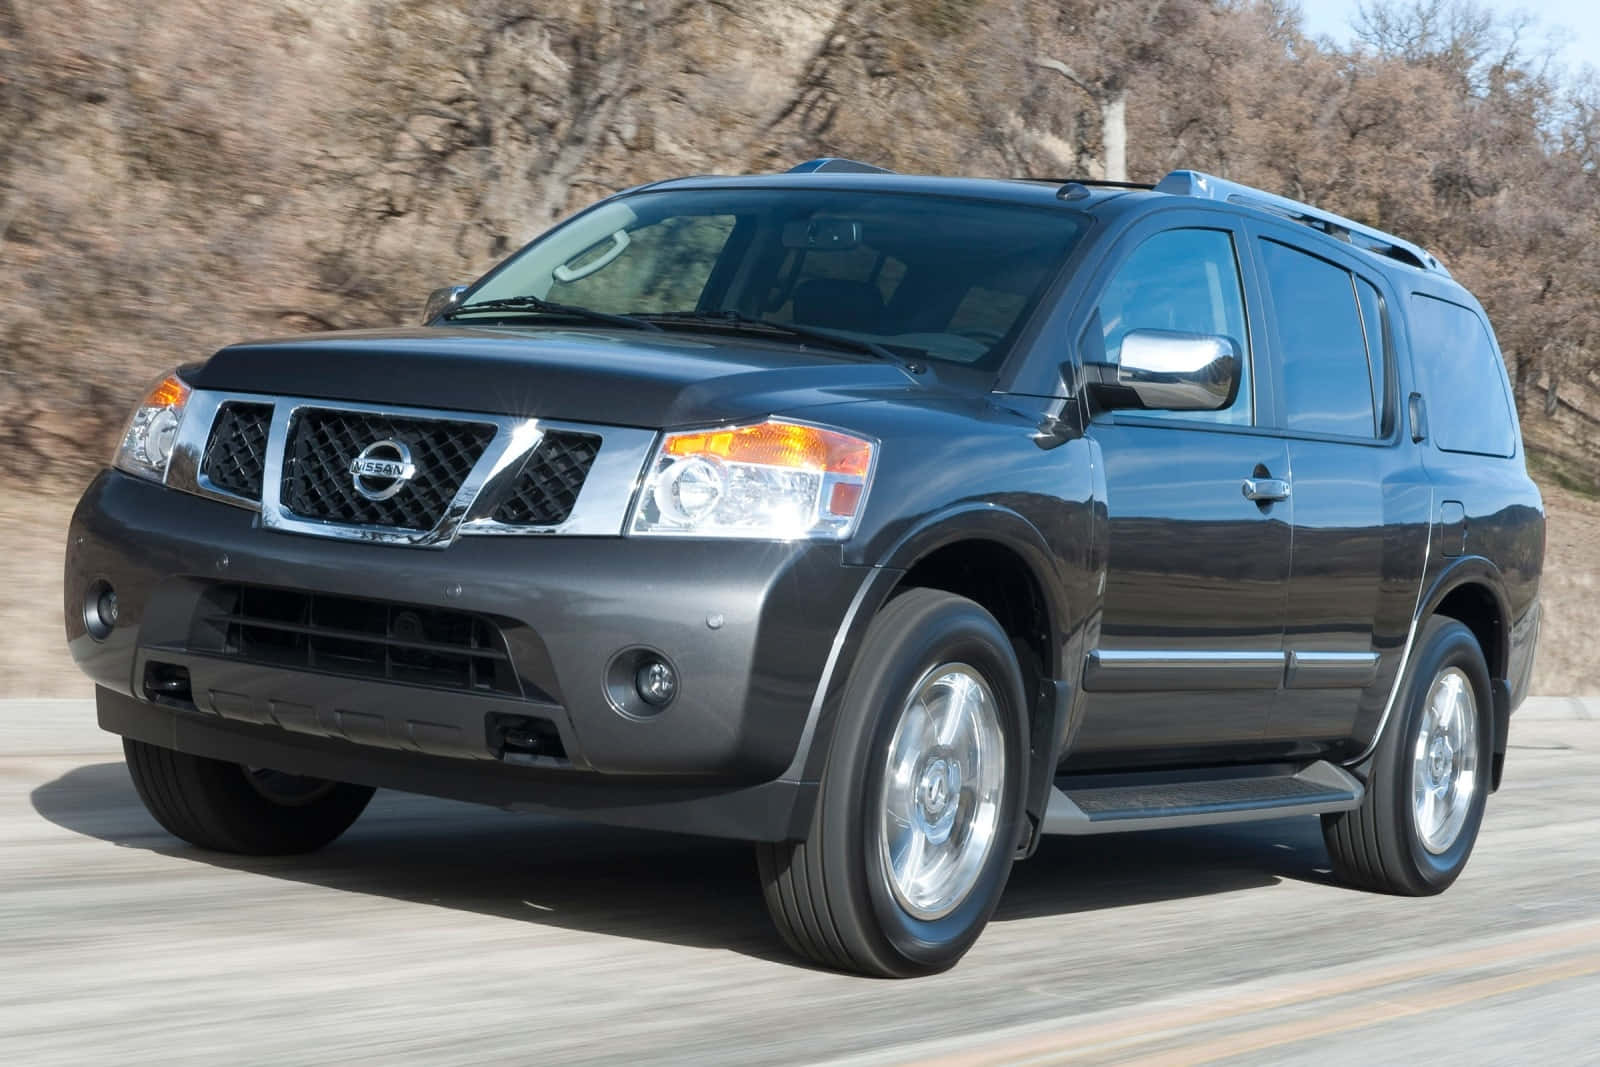 Majestic Nissan Armada Conquering The Rugged Outdoors. Wallpaper